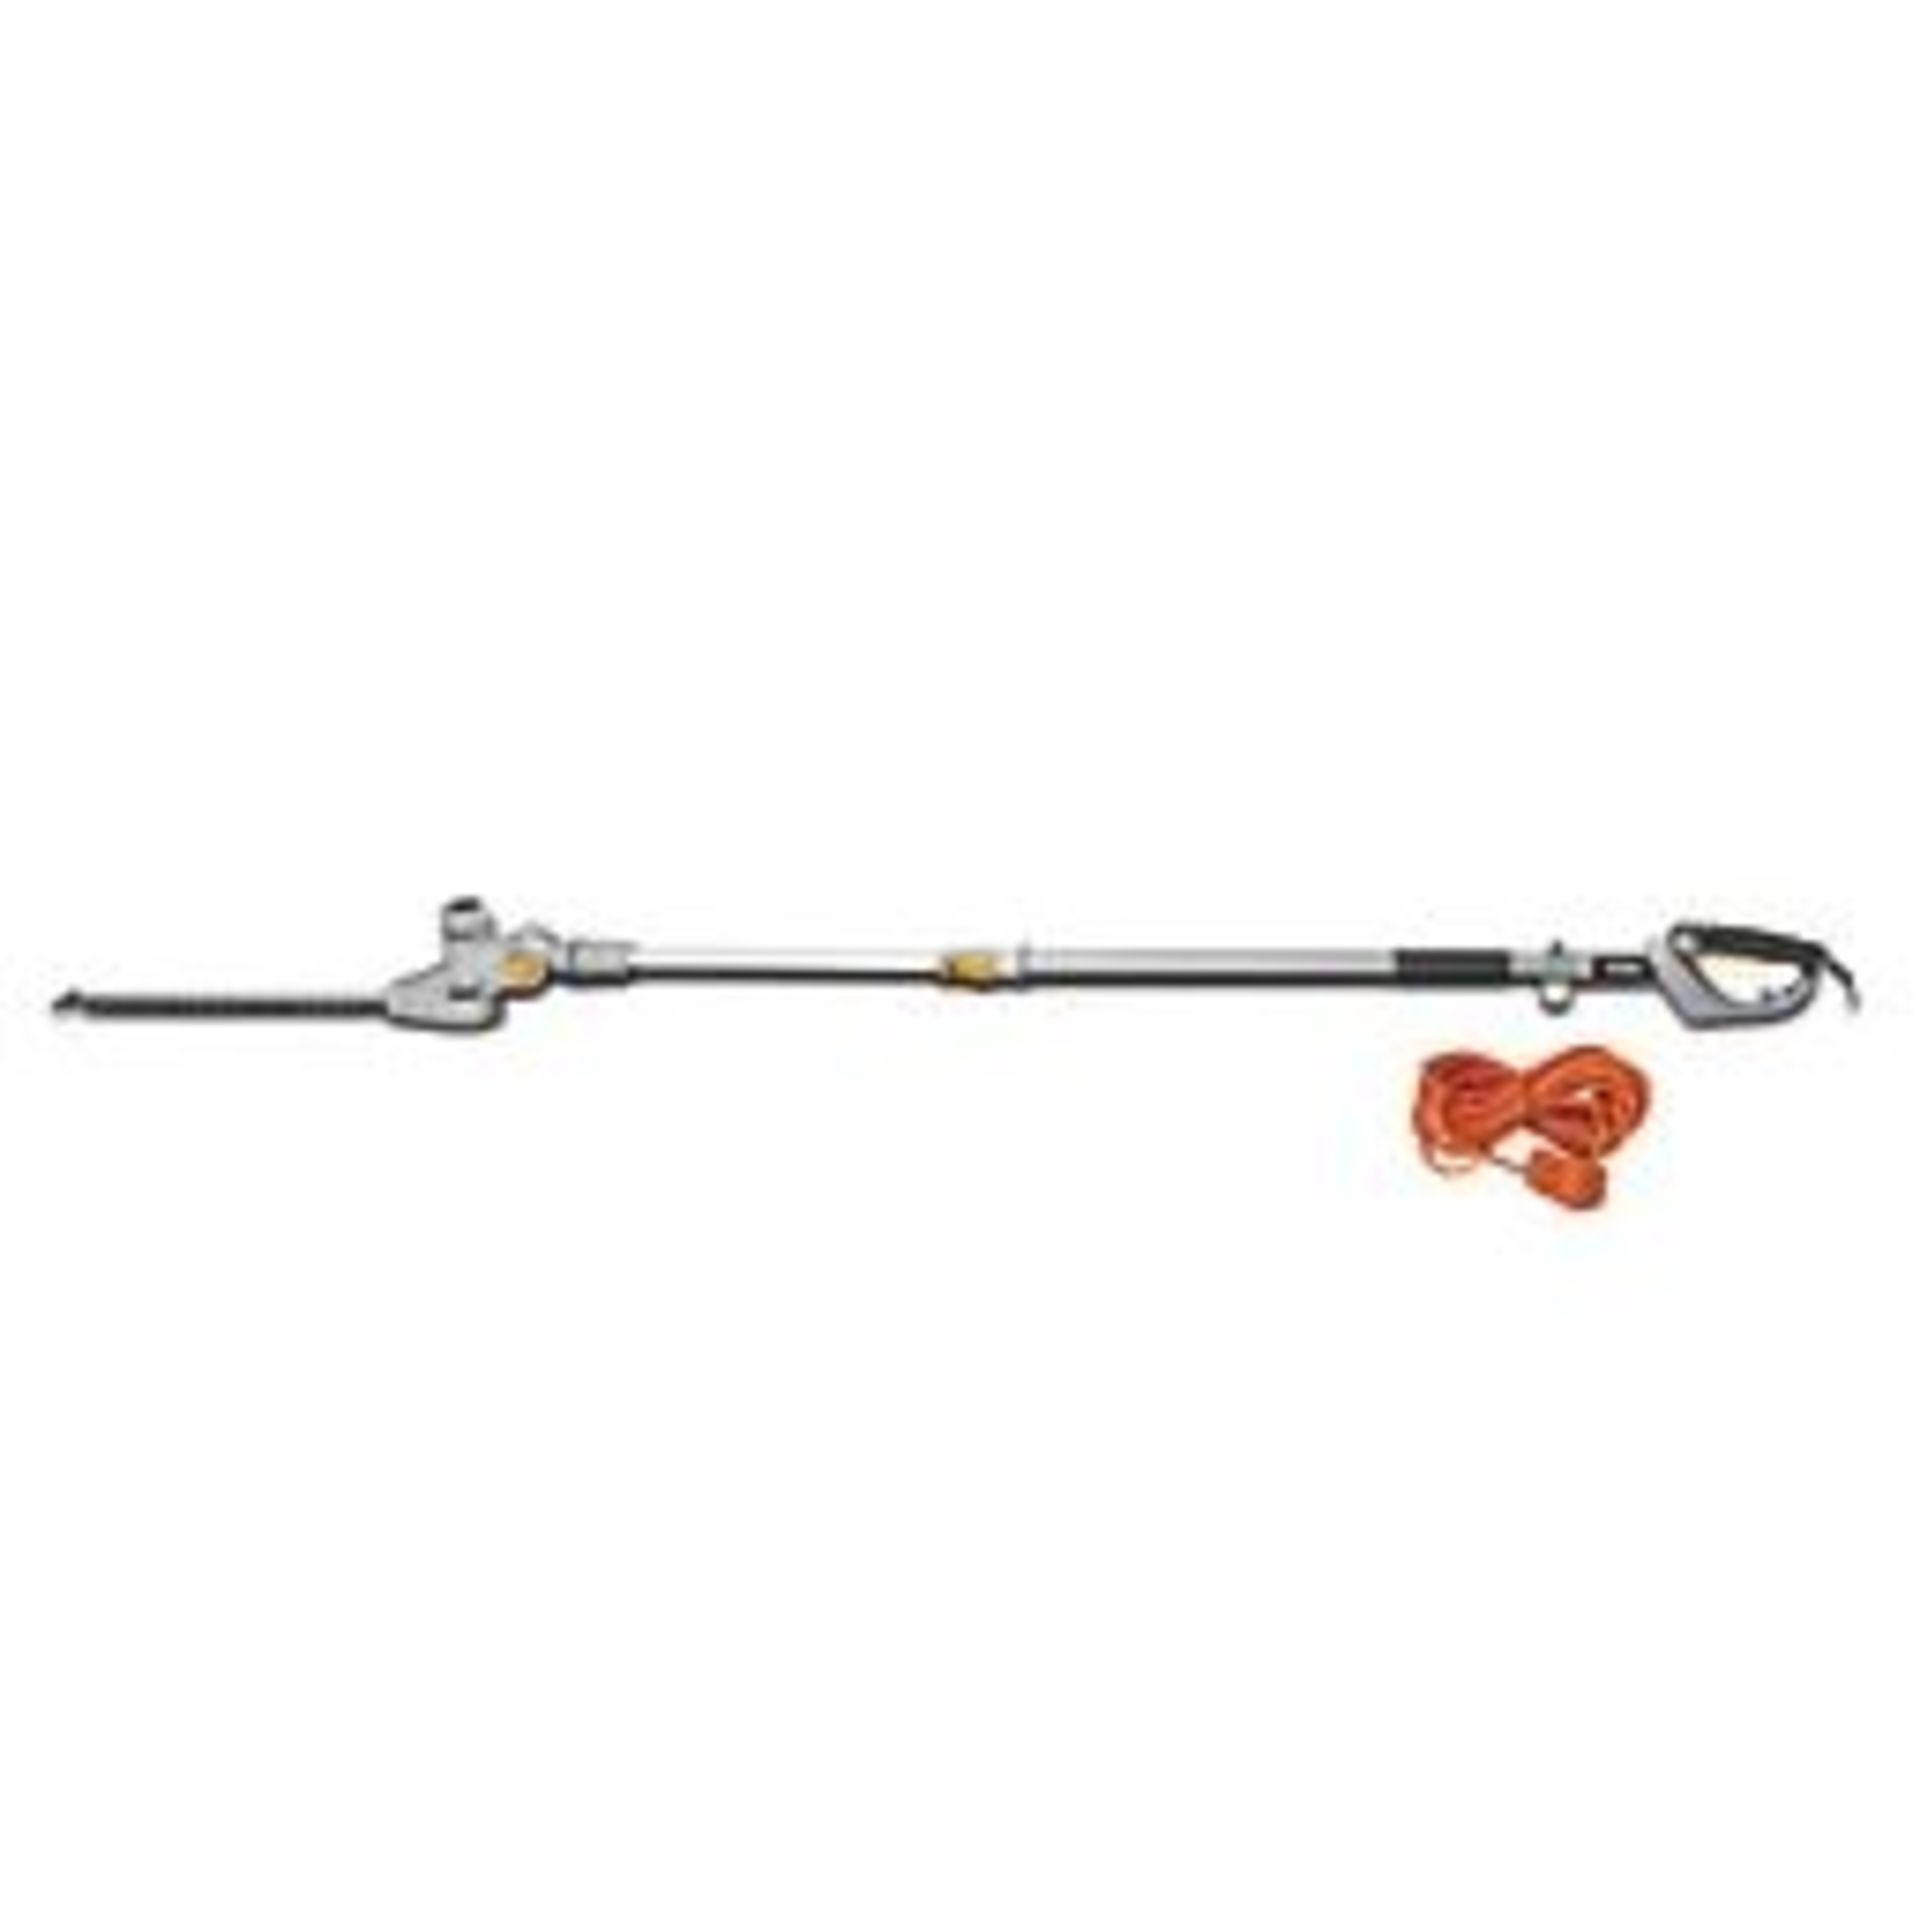 TITAN GHT550T2 50CM 550W 230-240V CORDED POLE HEDGE TRIMMER. - R13a.13.